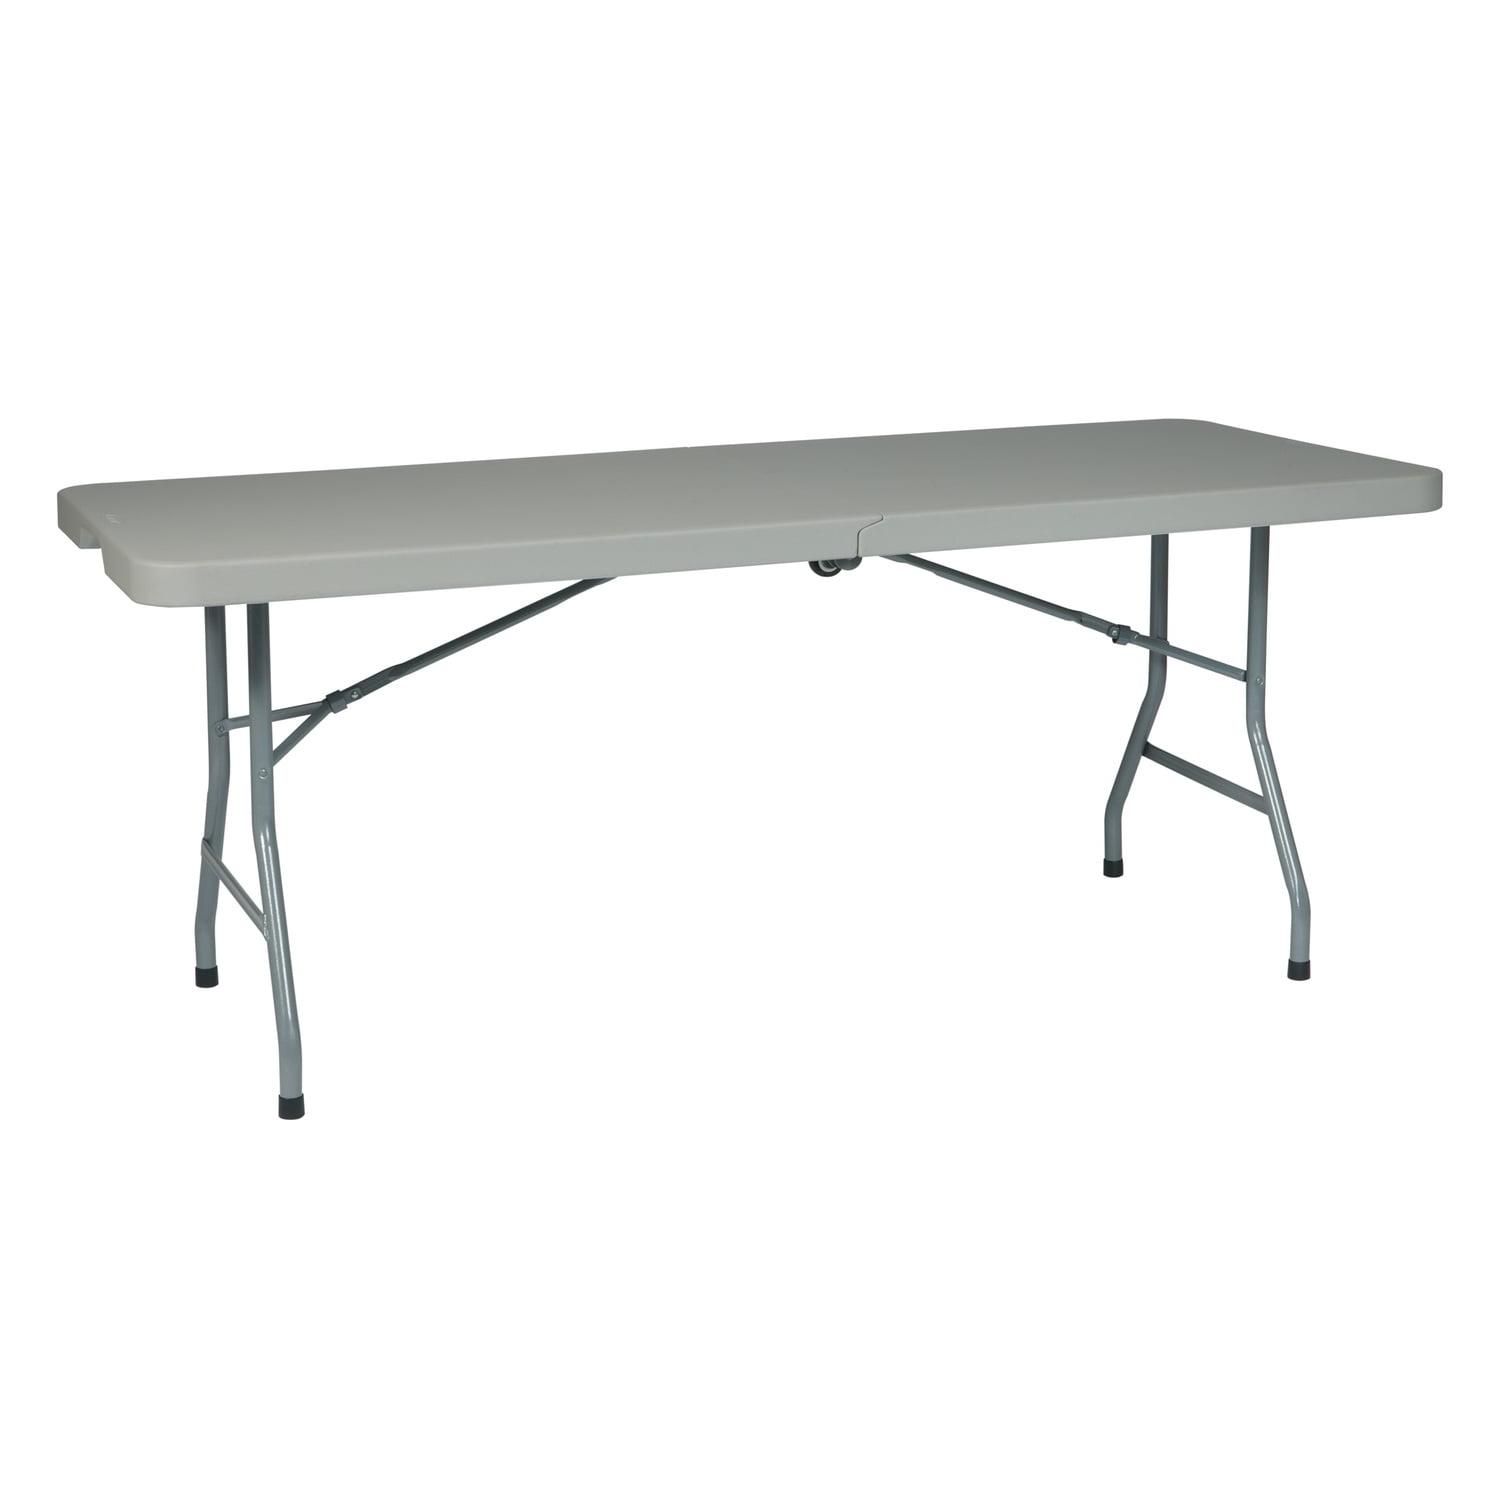 Sleek 6-Foot Light Gray Resin Foldable Table with Mobility Wheels